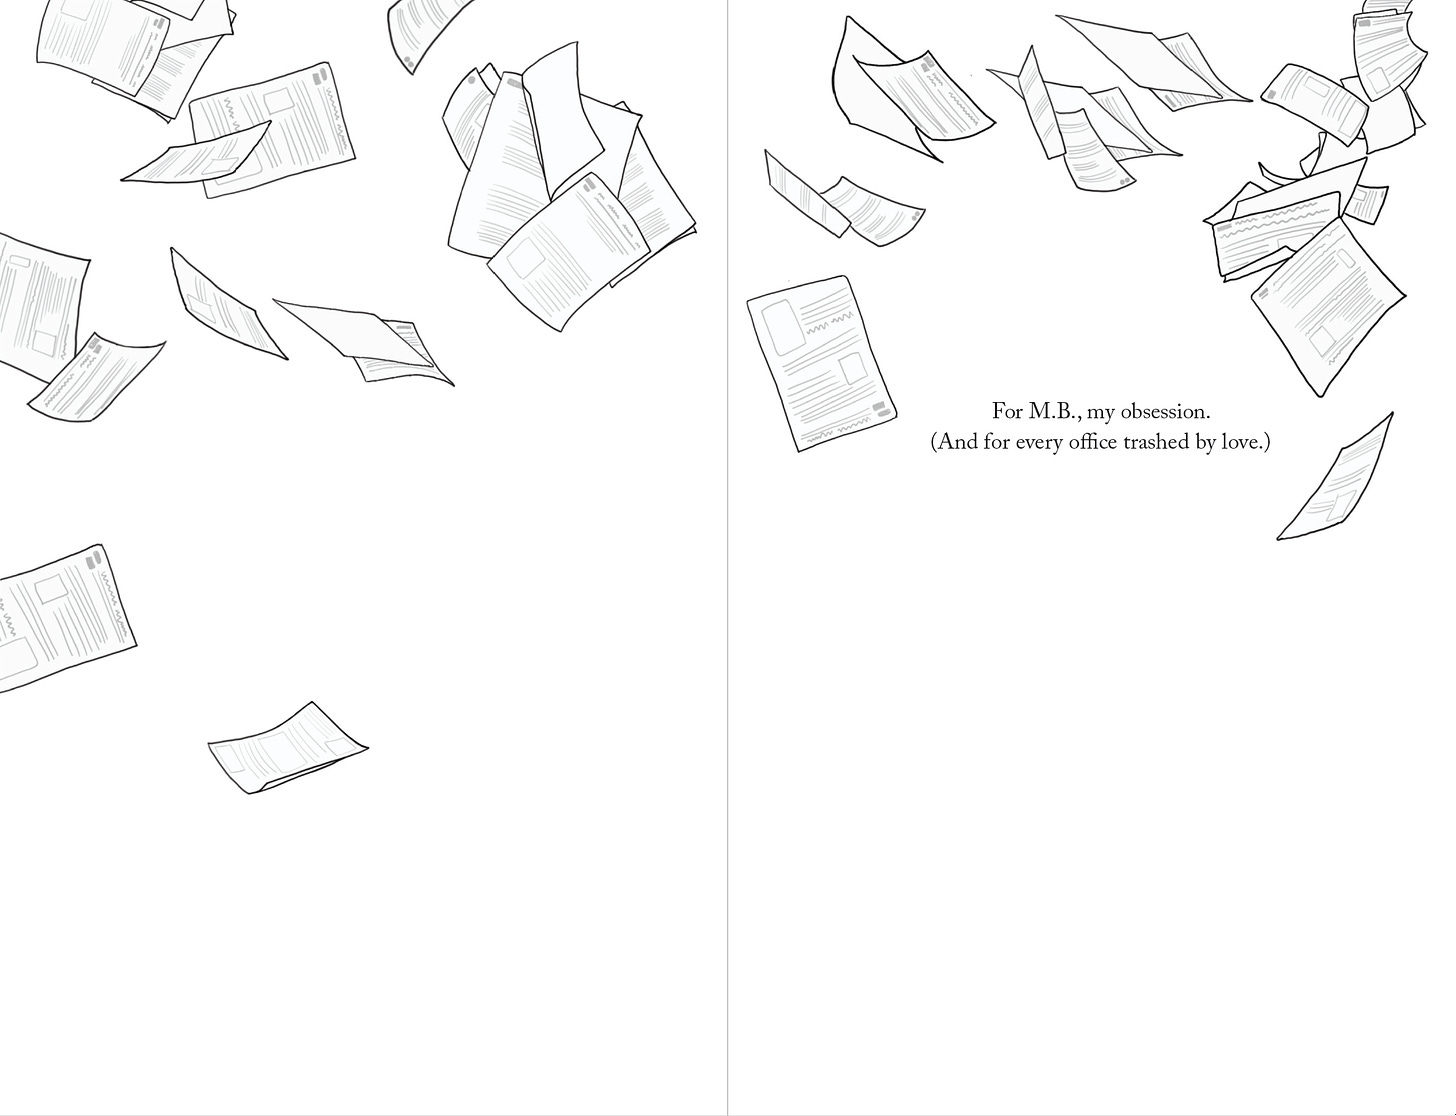 The two page dedication from the front of the "Stalker vs. Stalker" paperback, featuring documents thrown up into the air. The dedication reads: "For M.B., my obsession. (And for every office trashed by love.)"